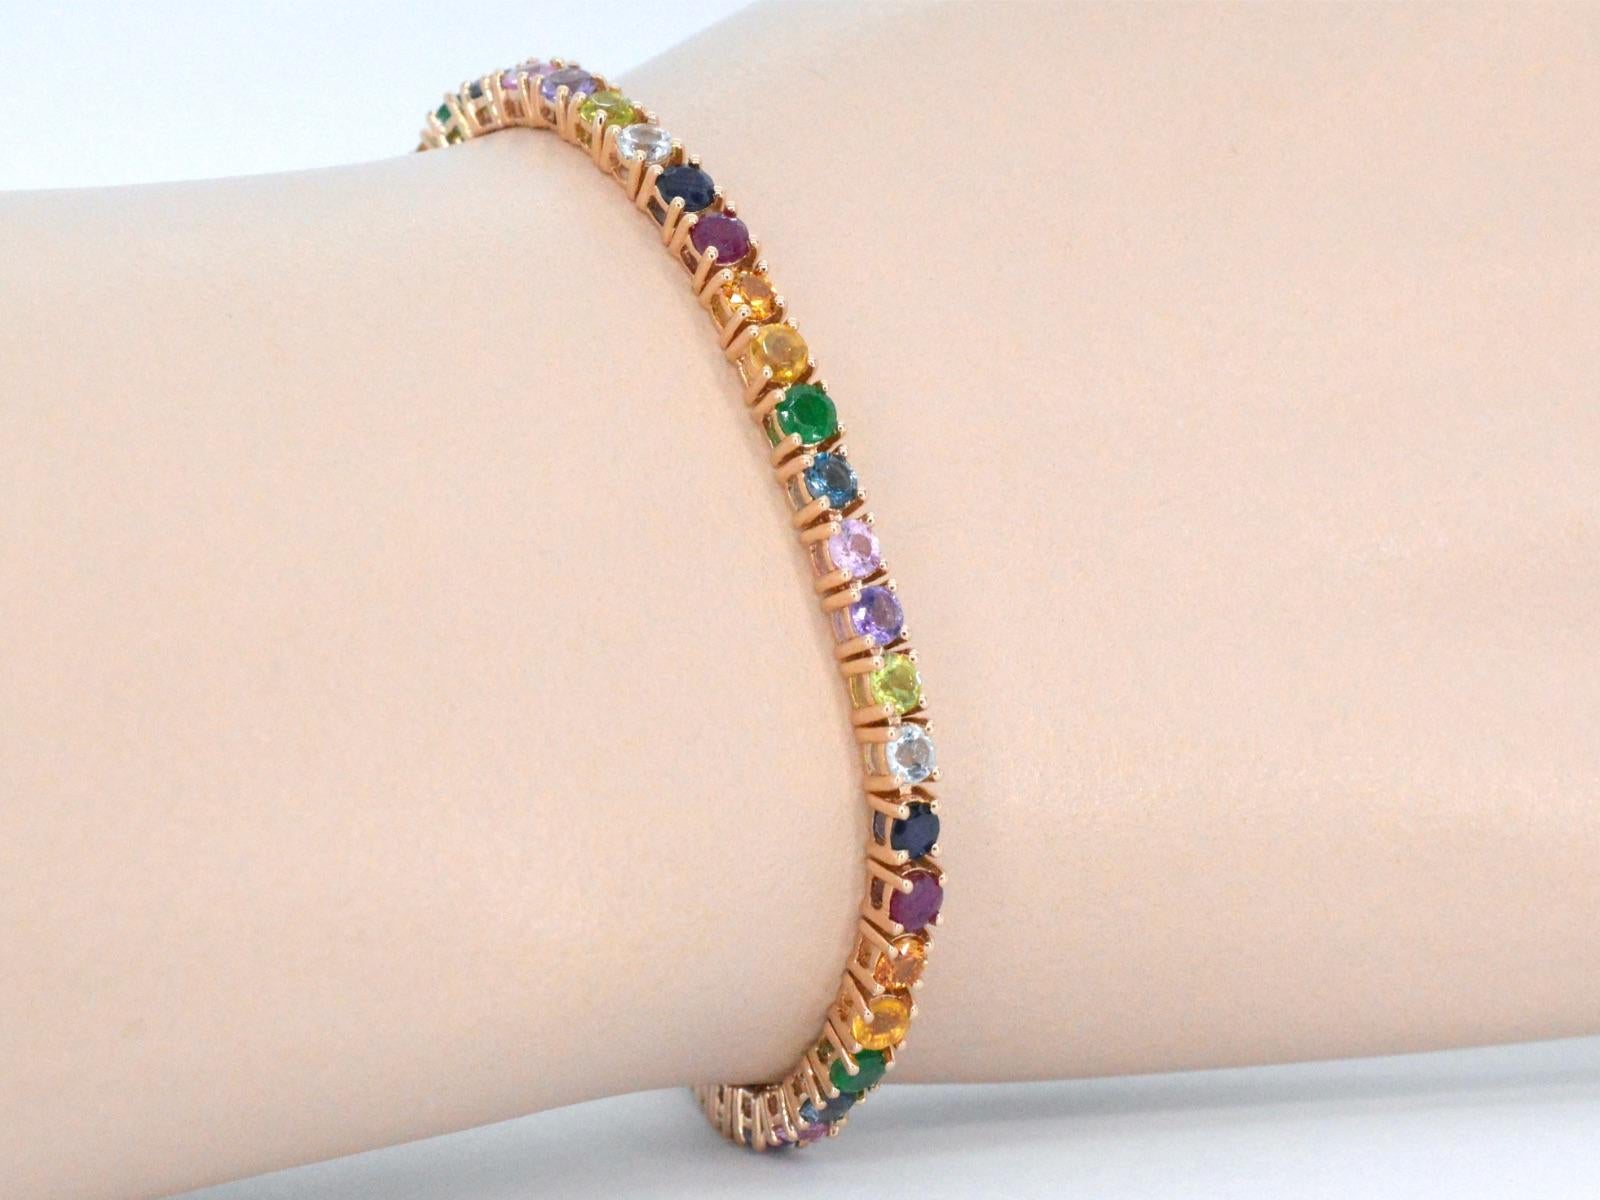 Gemstones: Rainbow
Weight: 7.50 carats
Colour: multicolour
Clarity: With natural inclusions
Cut: Brilliant cut
Quality: Very good

Jewel: Bracelet
Weight: 10 gram
Hallmark: 14 karat 
Length: 18 cm
Condition: New

Retail value: € 

A rose gold tennis